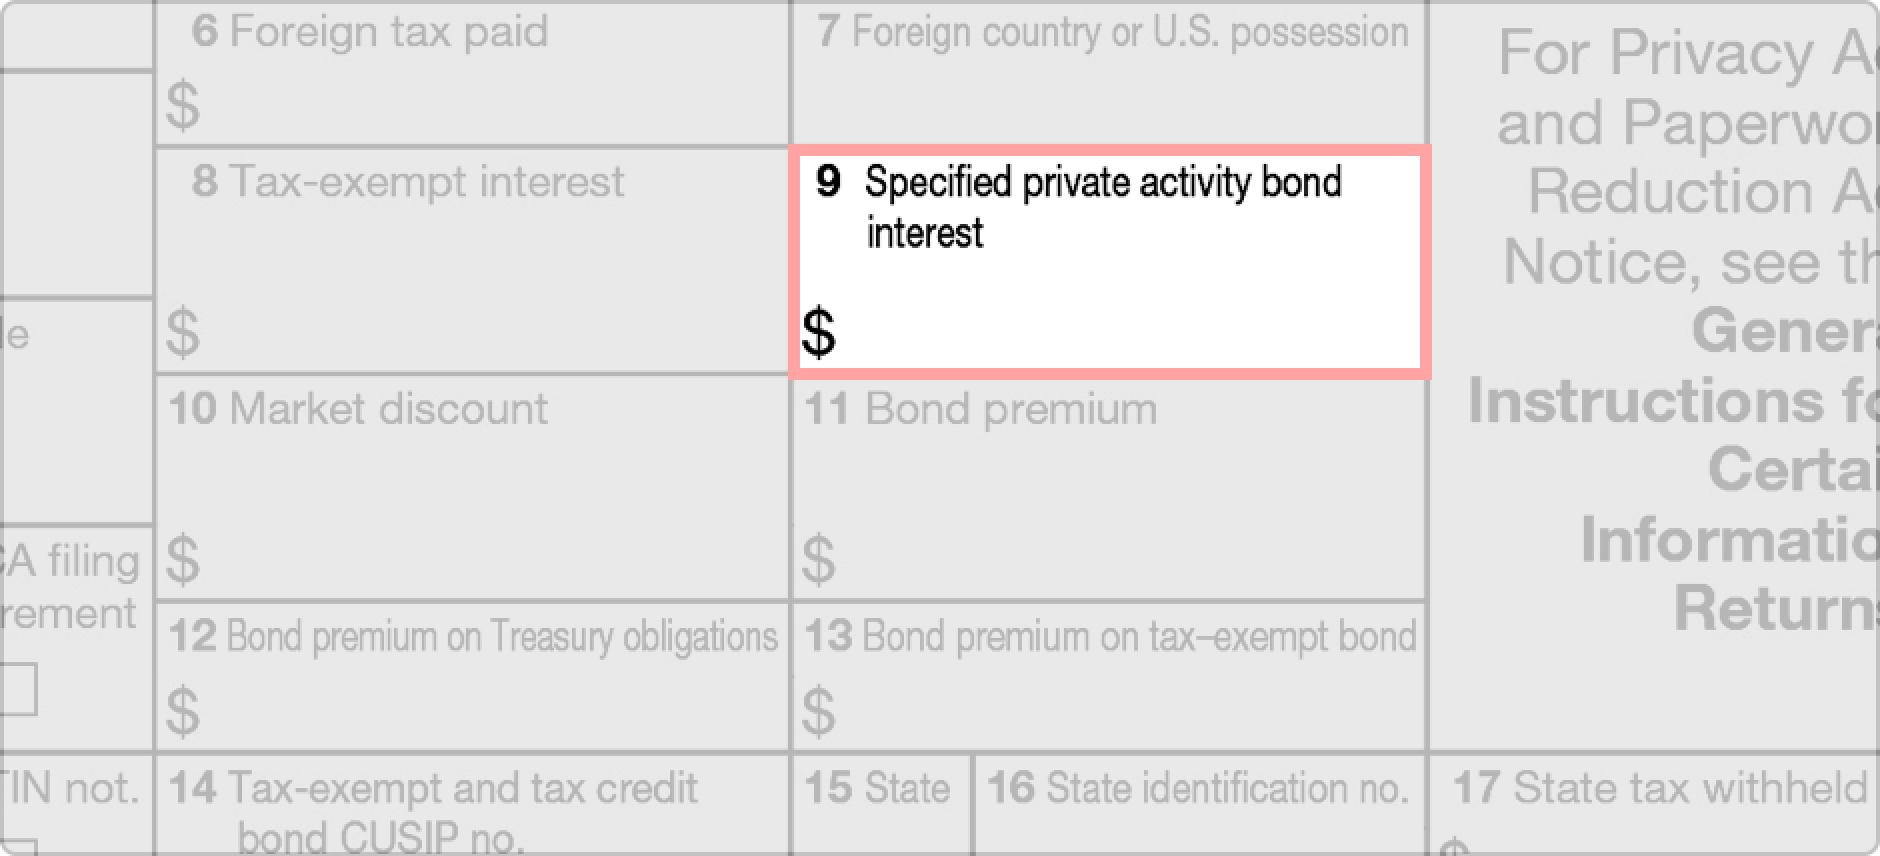 Specified Private Activity Bond Interest